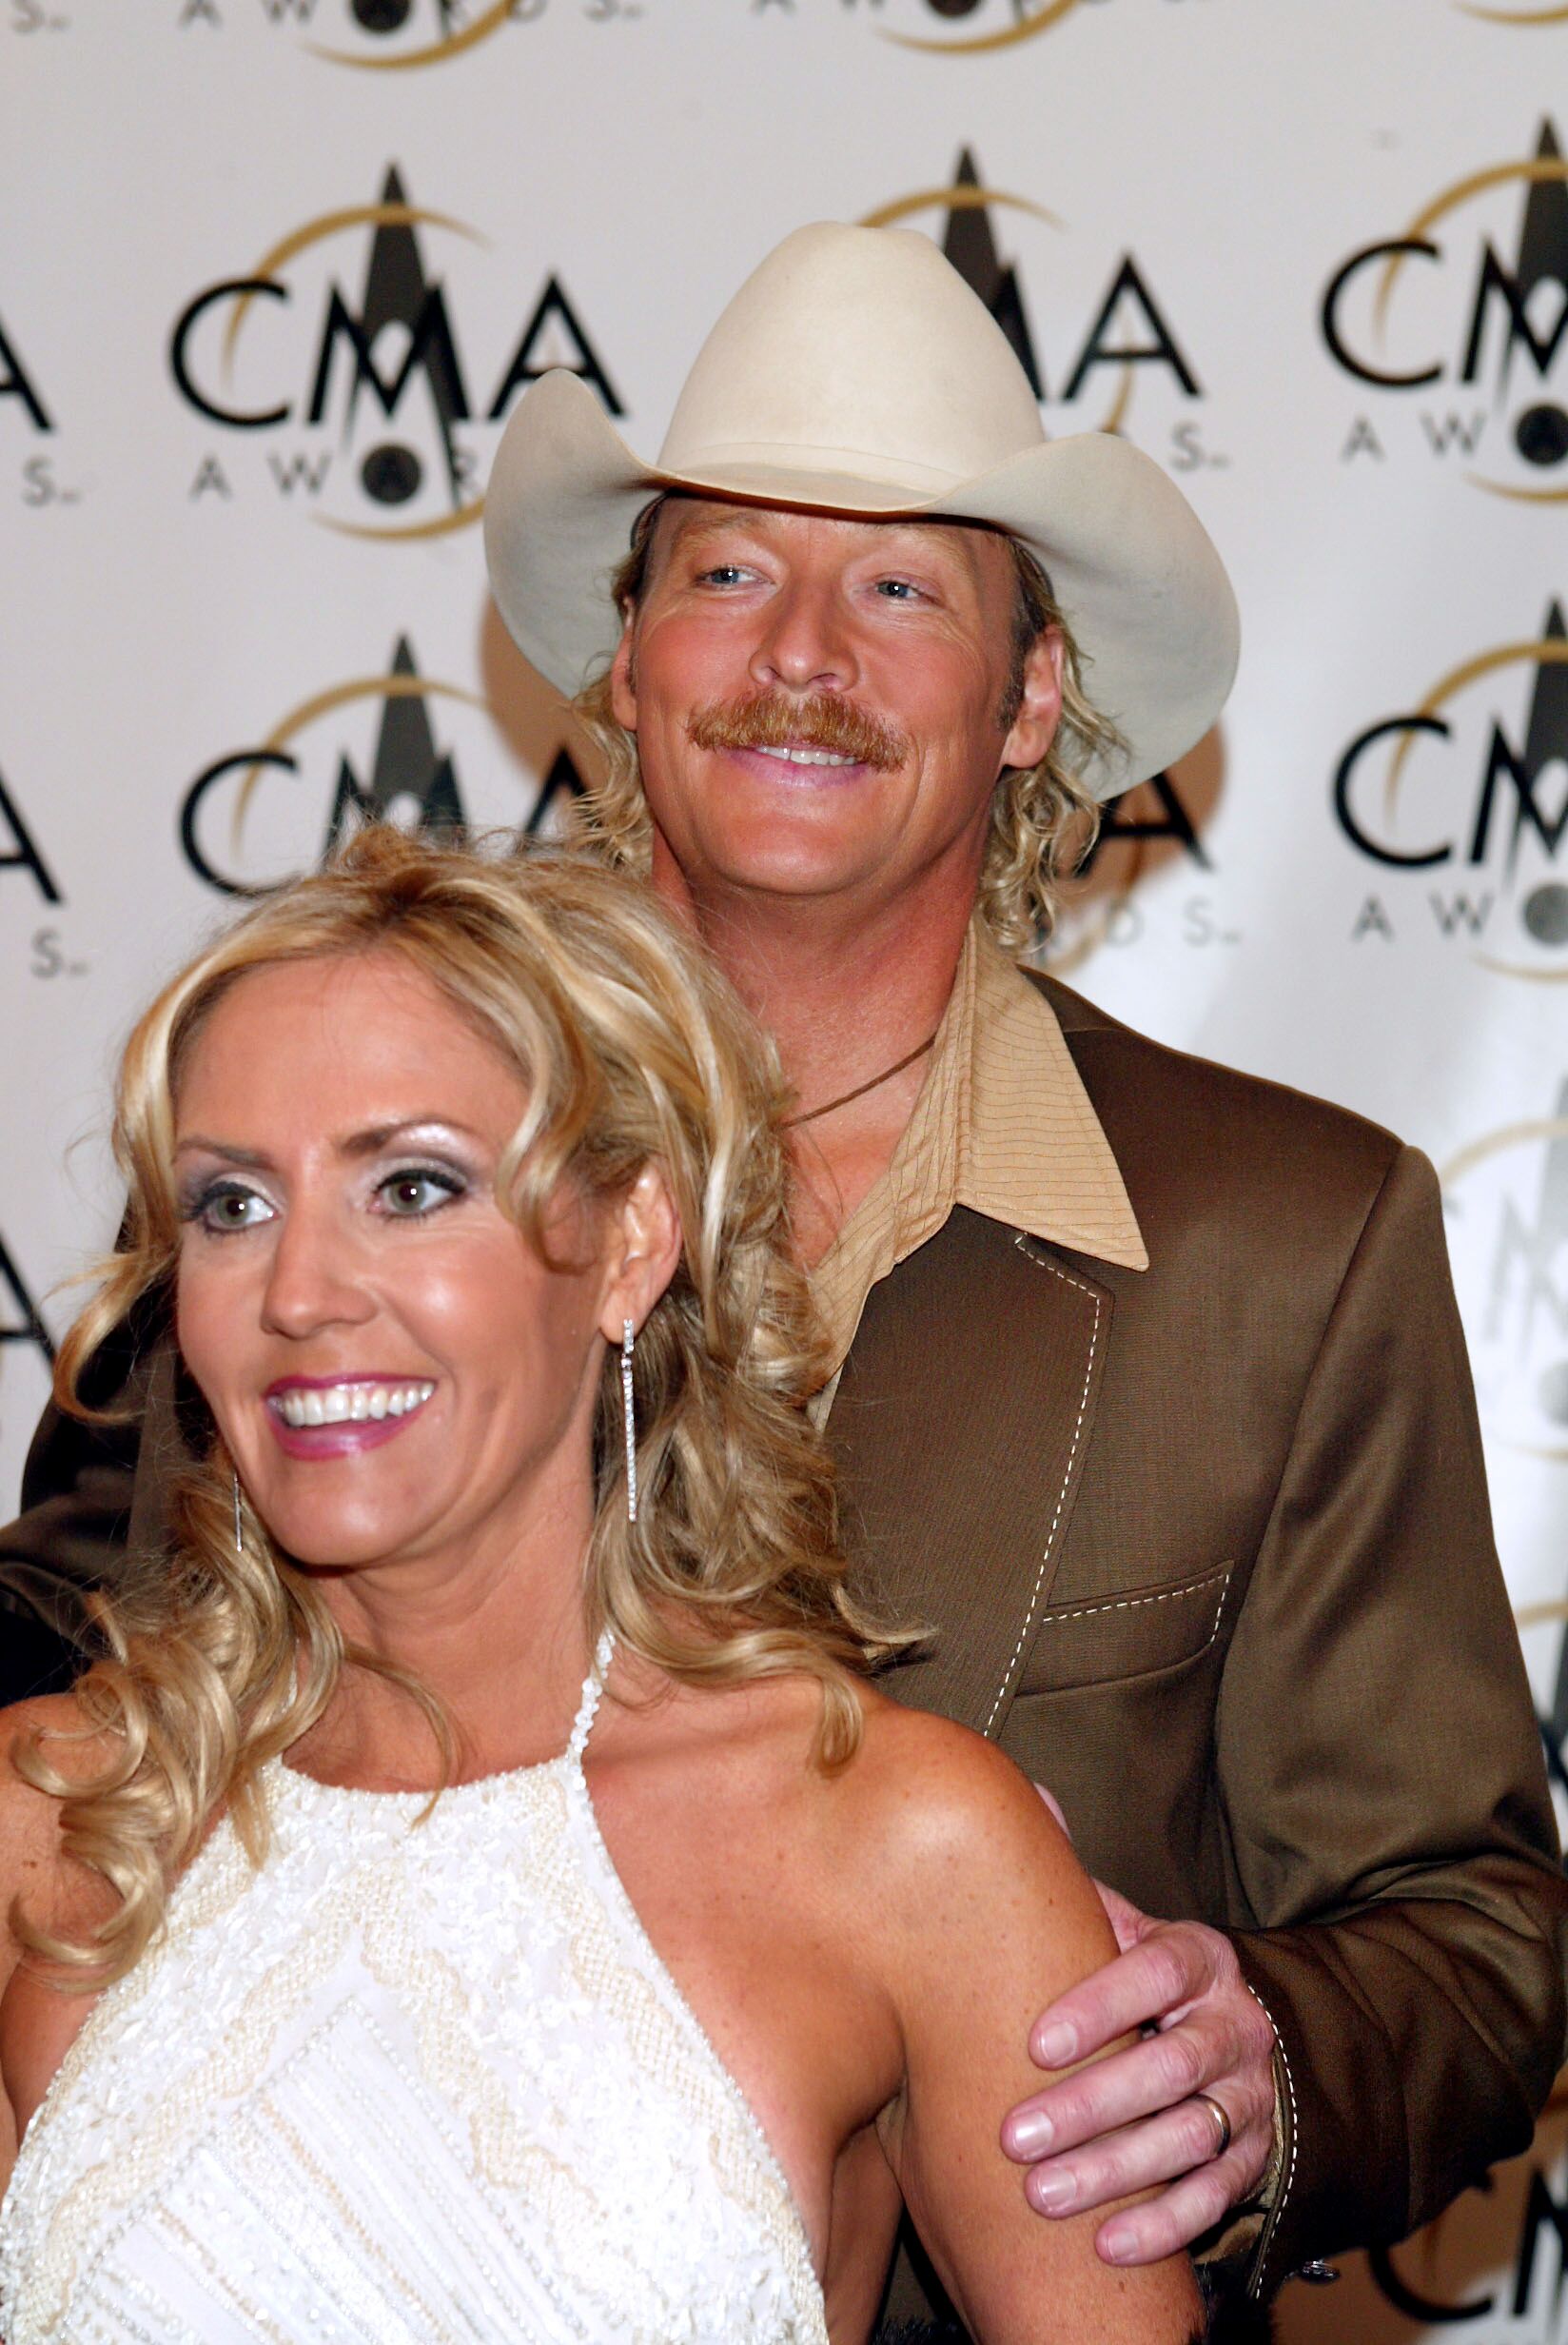 Alan Jackson arrives with his wife Denise at the 36th annual Country Music Association Awards at the Grand Ole Opry House in Nashville, Tennessee, November 6, 2002 | Photo: Getty Images